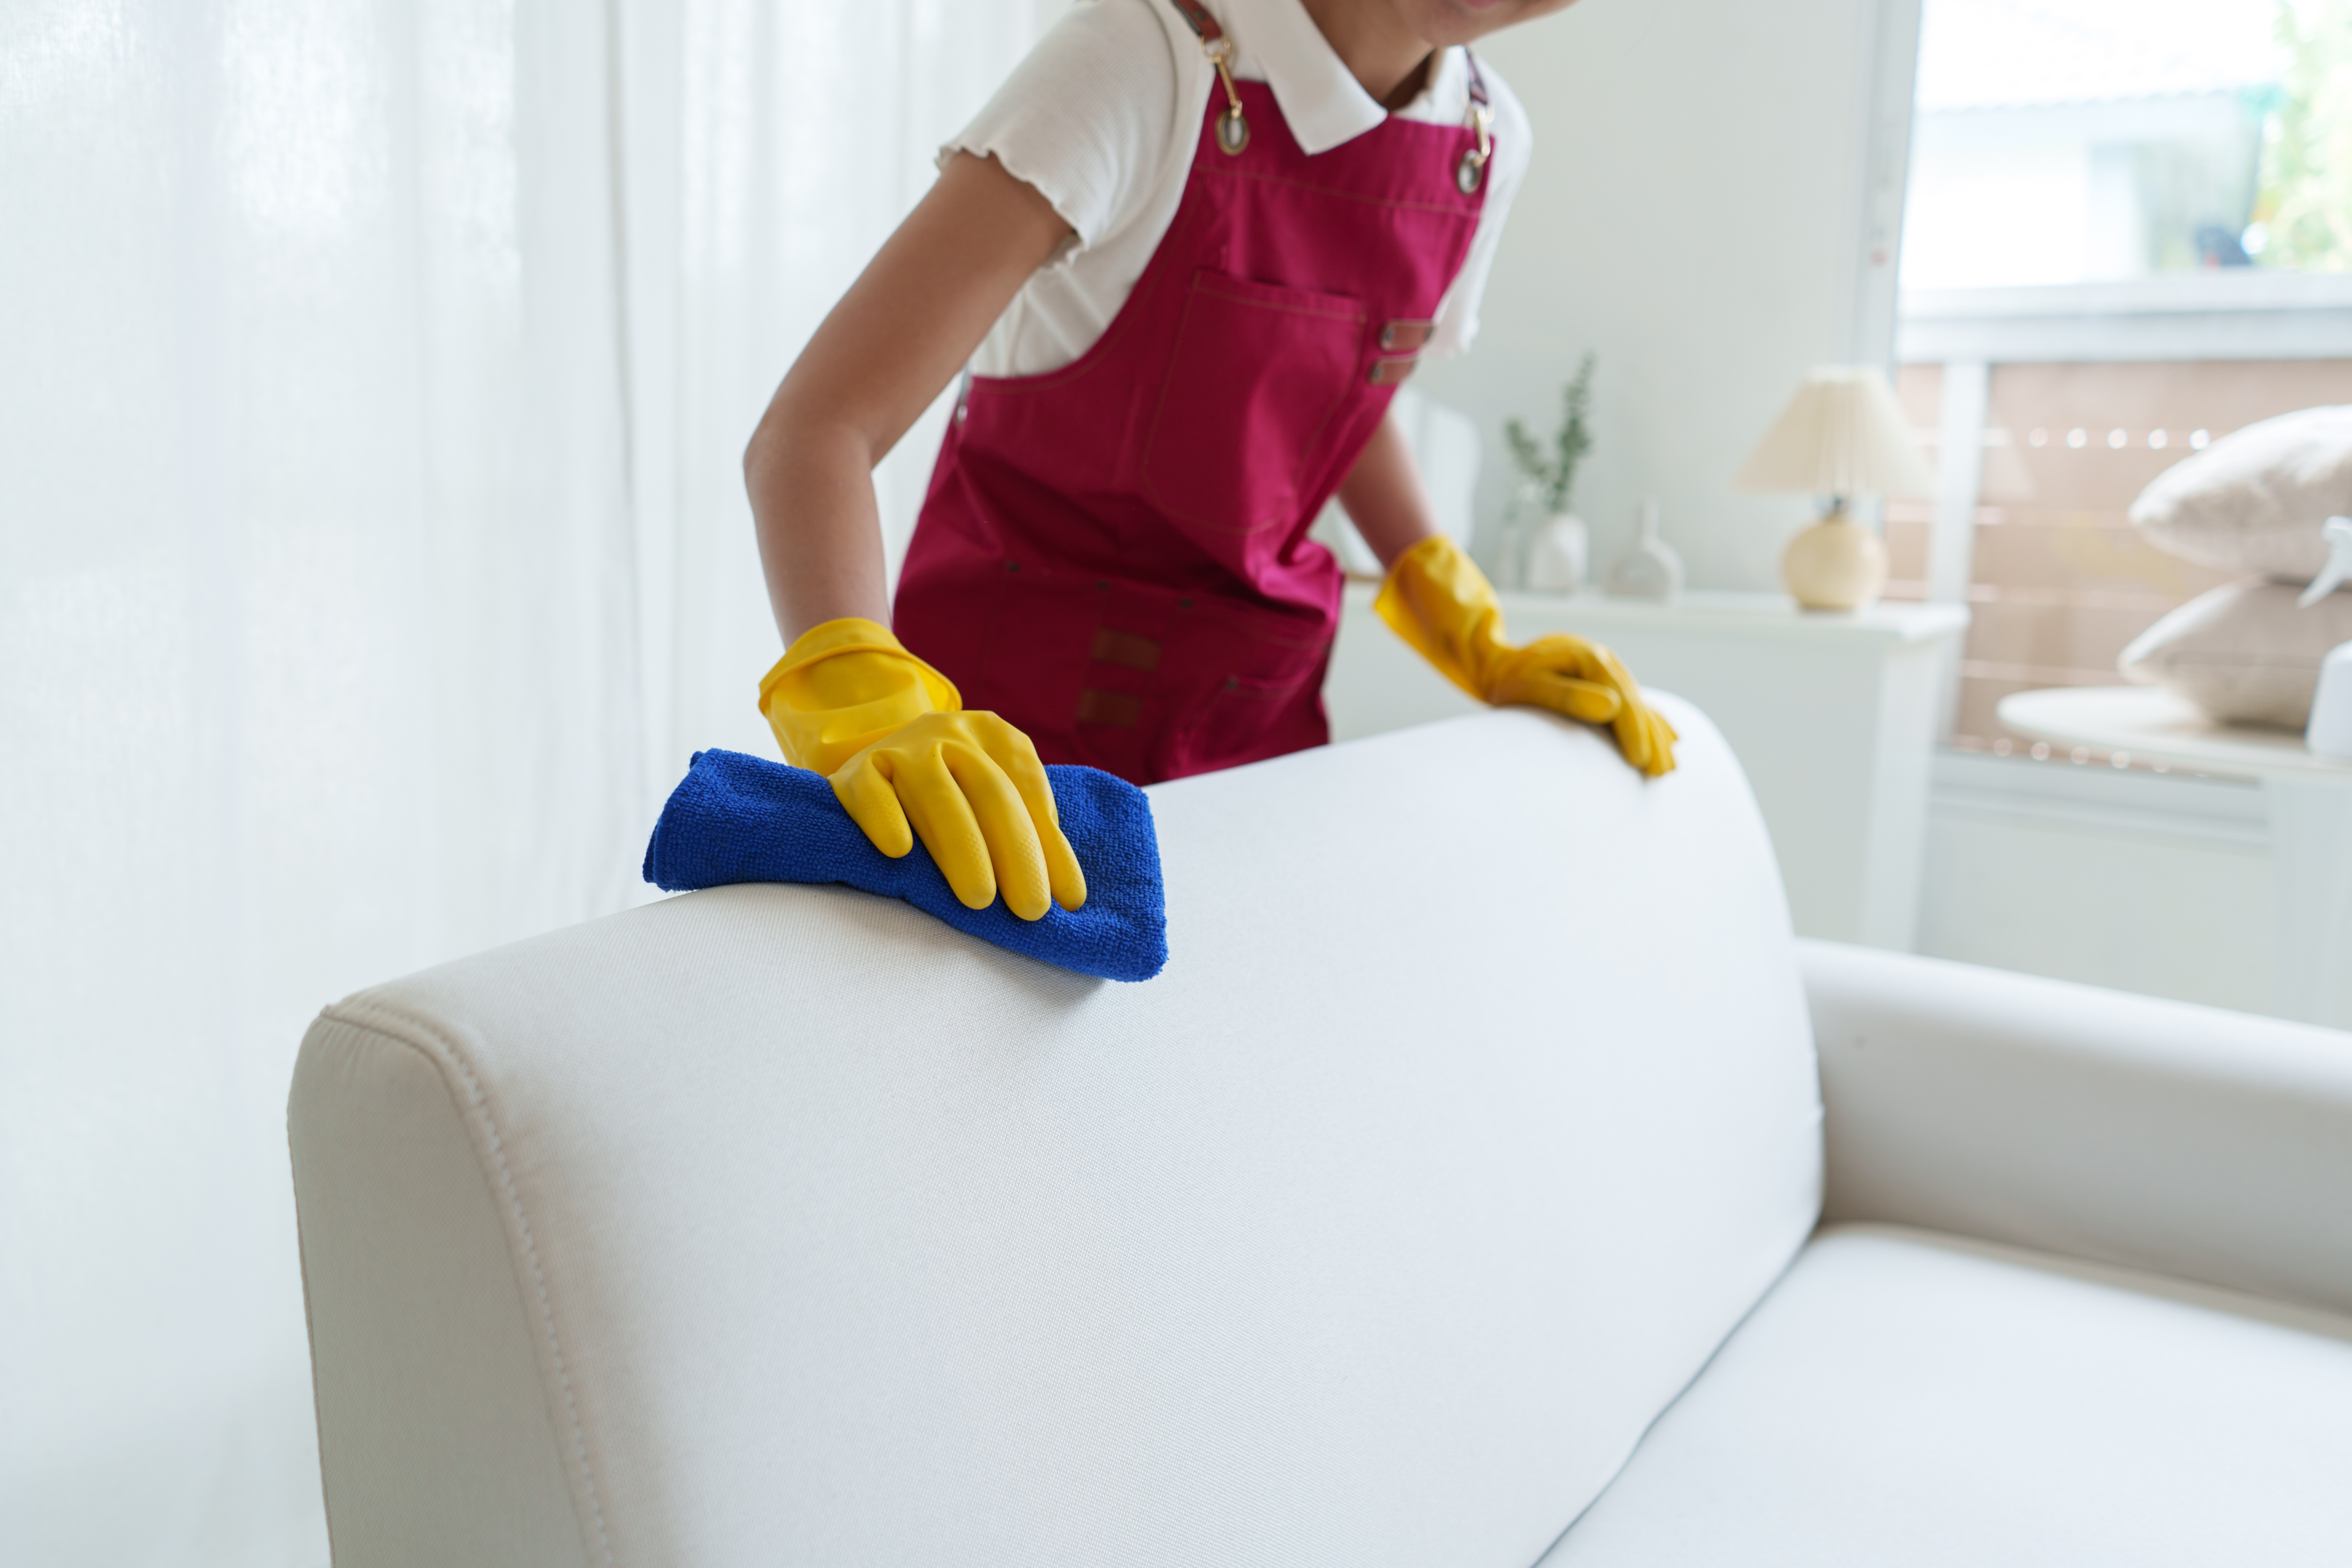 Offering standard cleaning work is usually profitable for the contractor